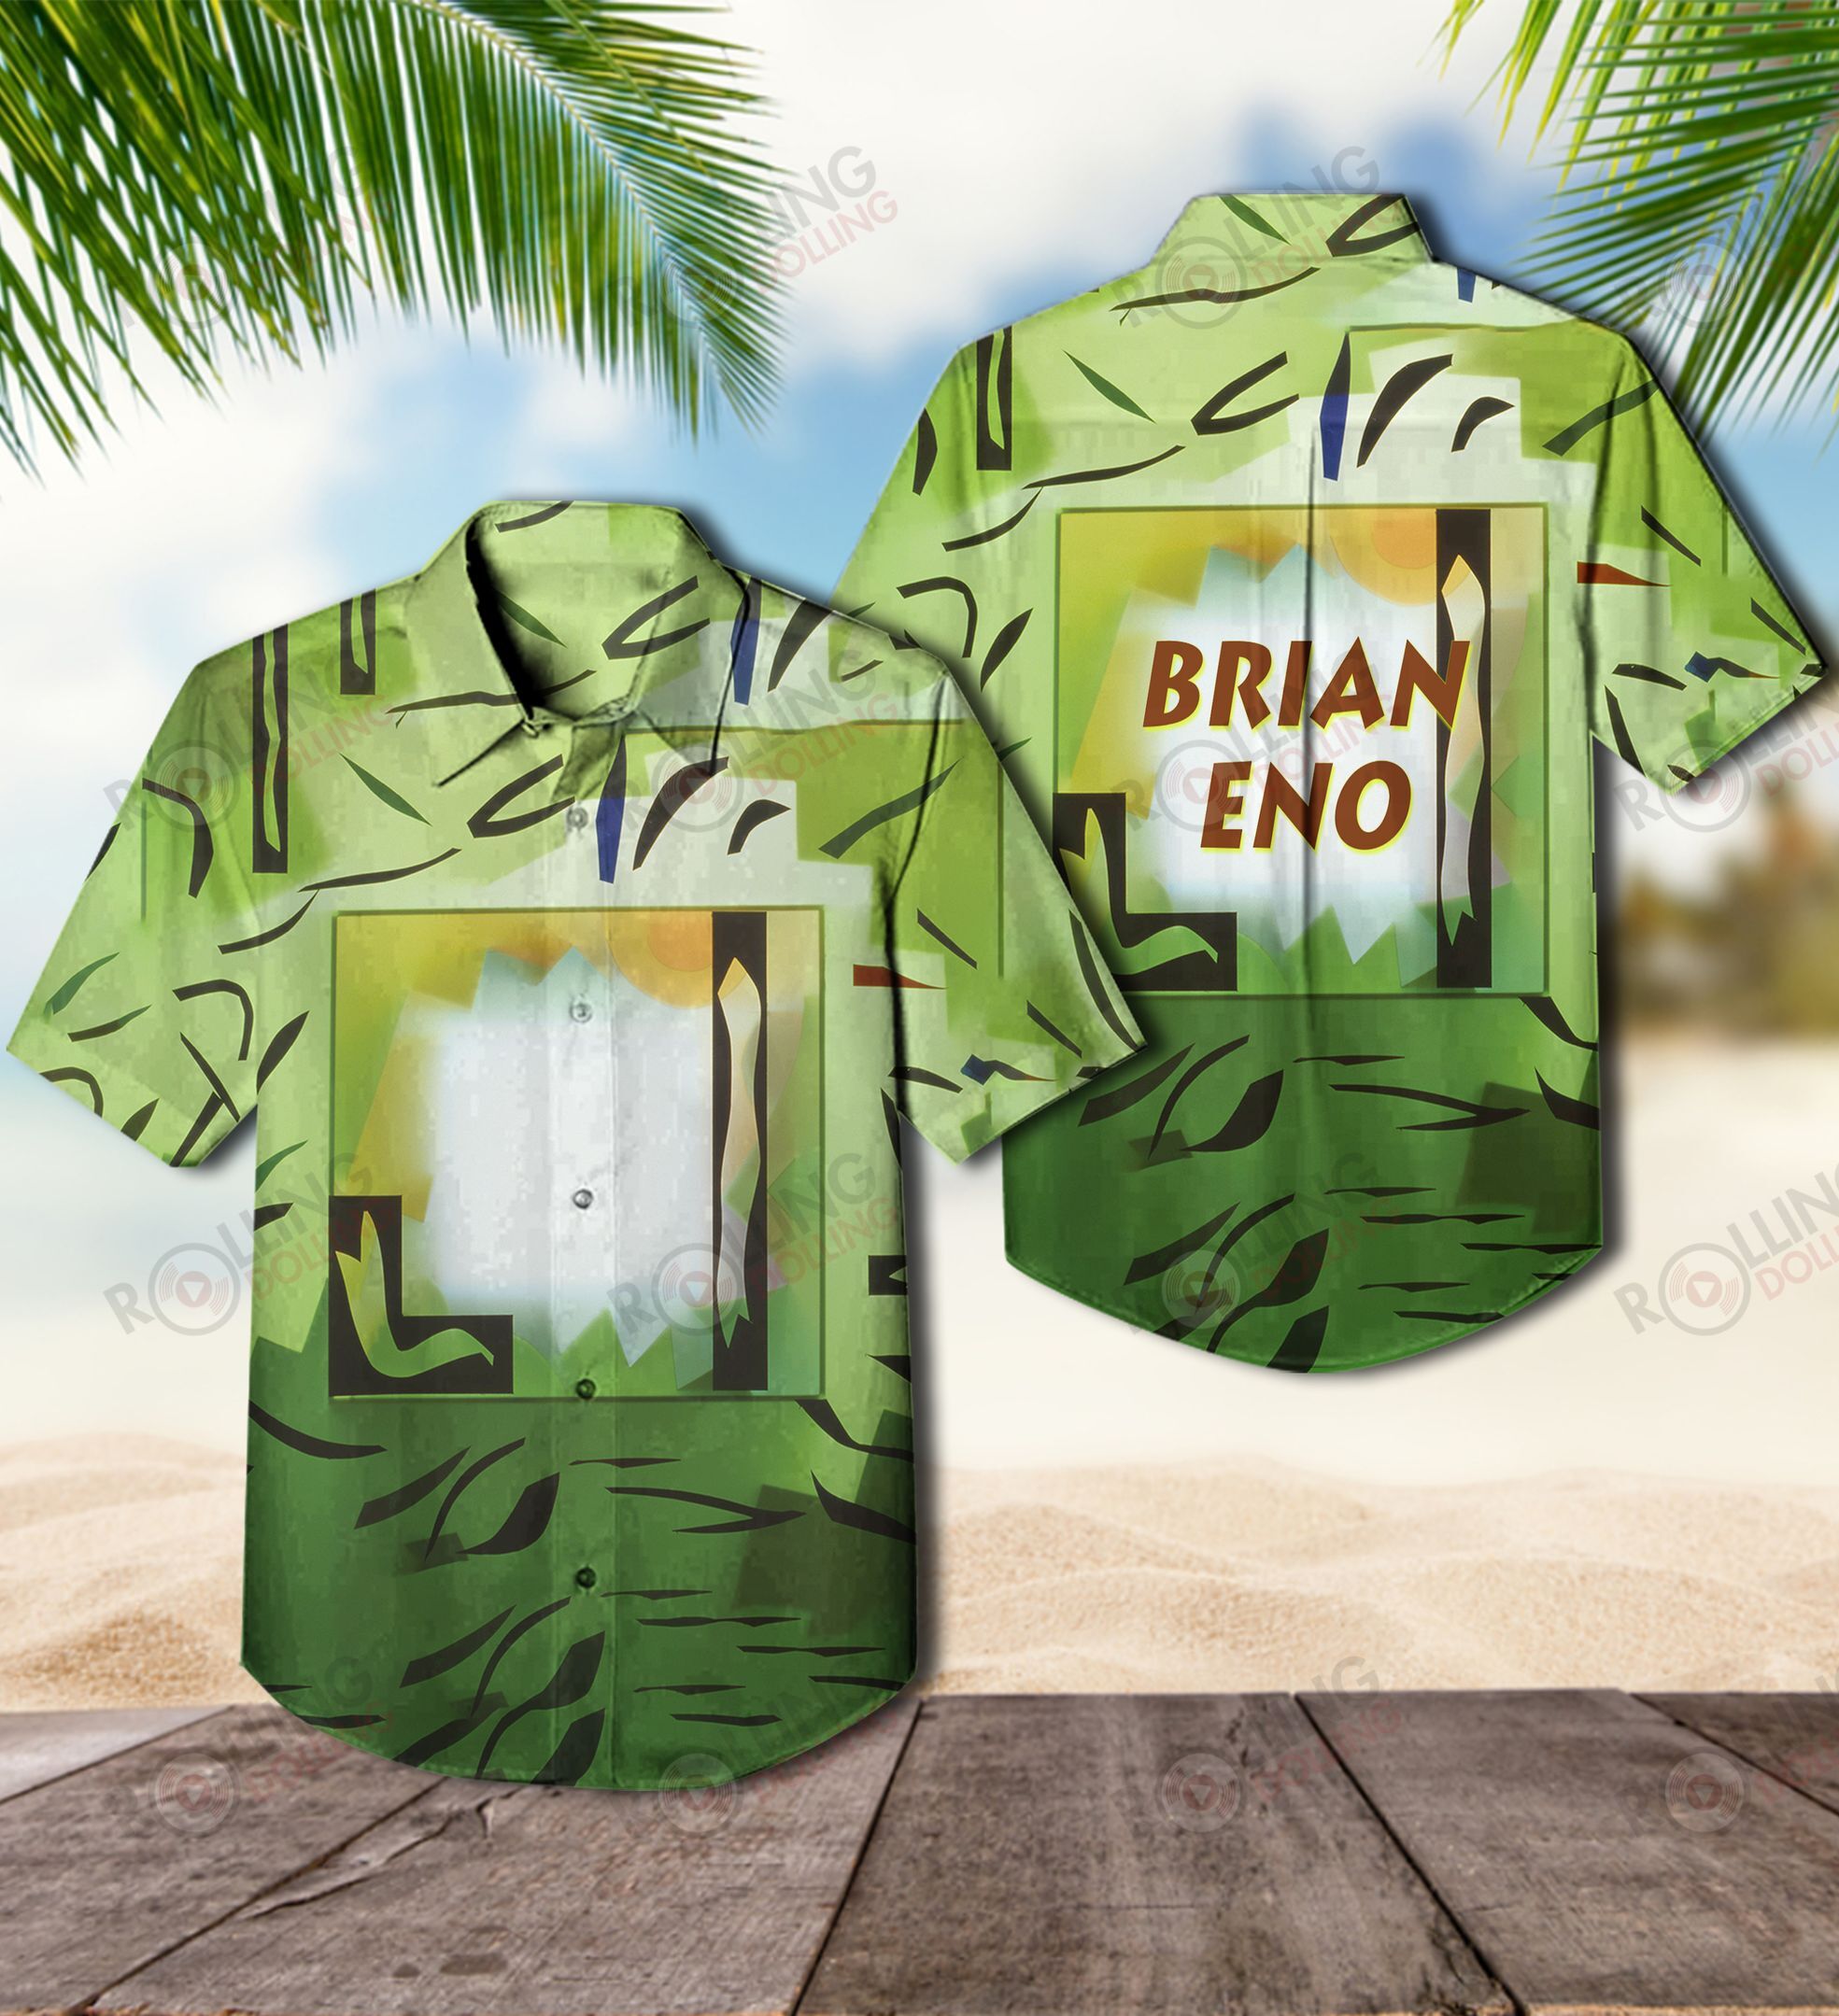 The Hawaiian Shirt is a popular shirt that is worn by Rock band fans 46